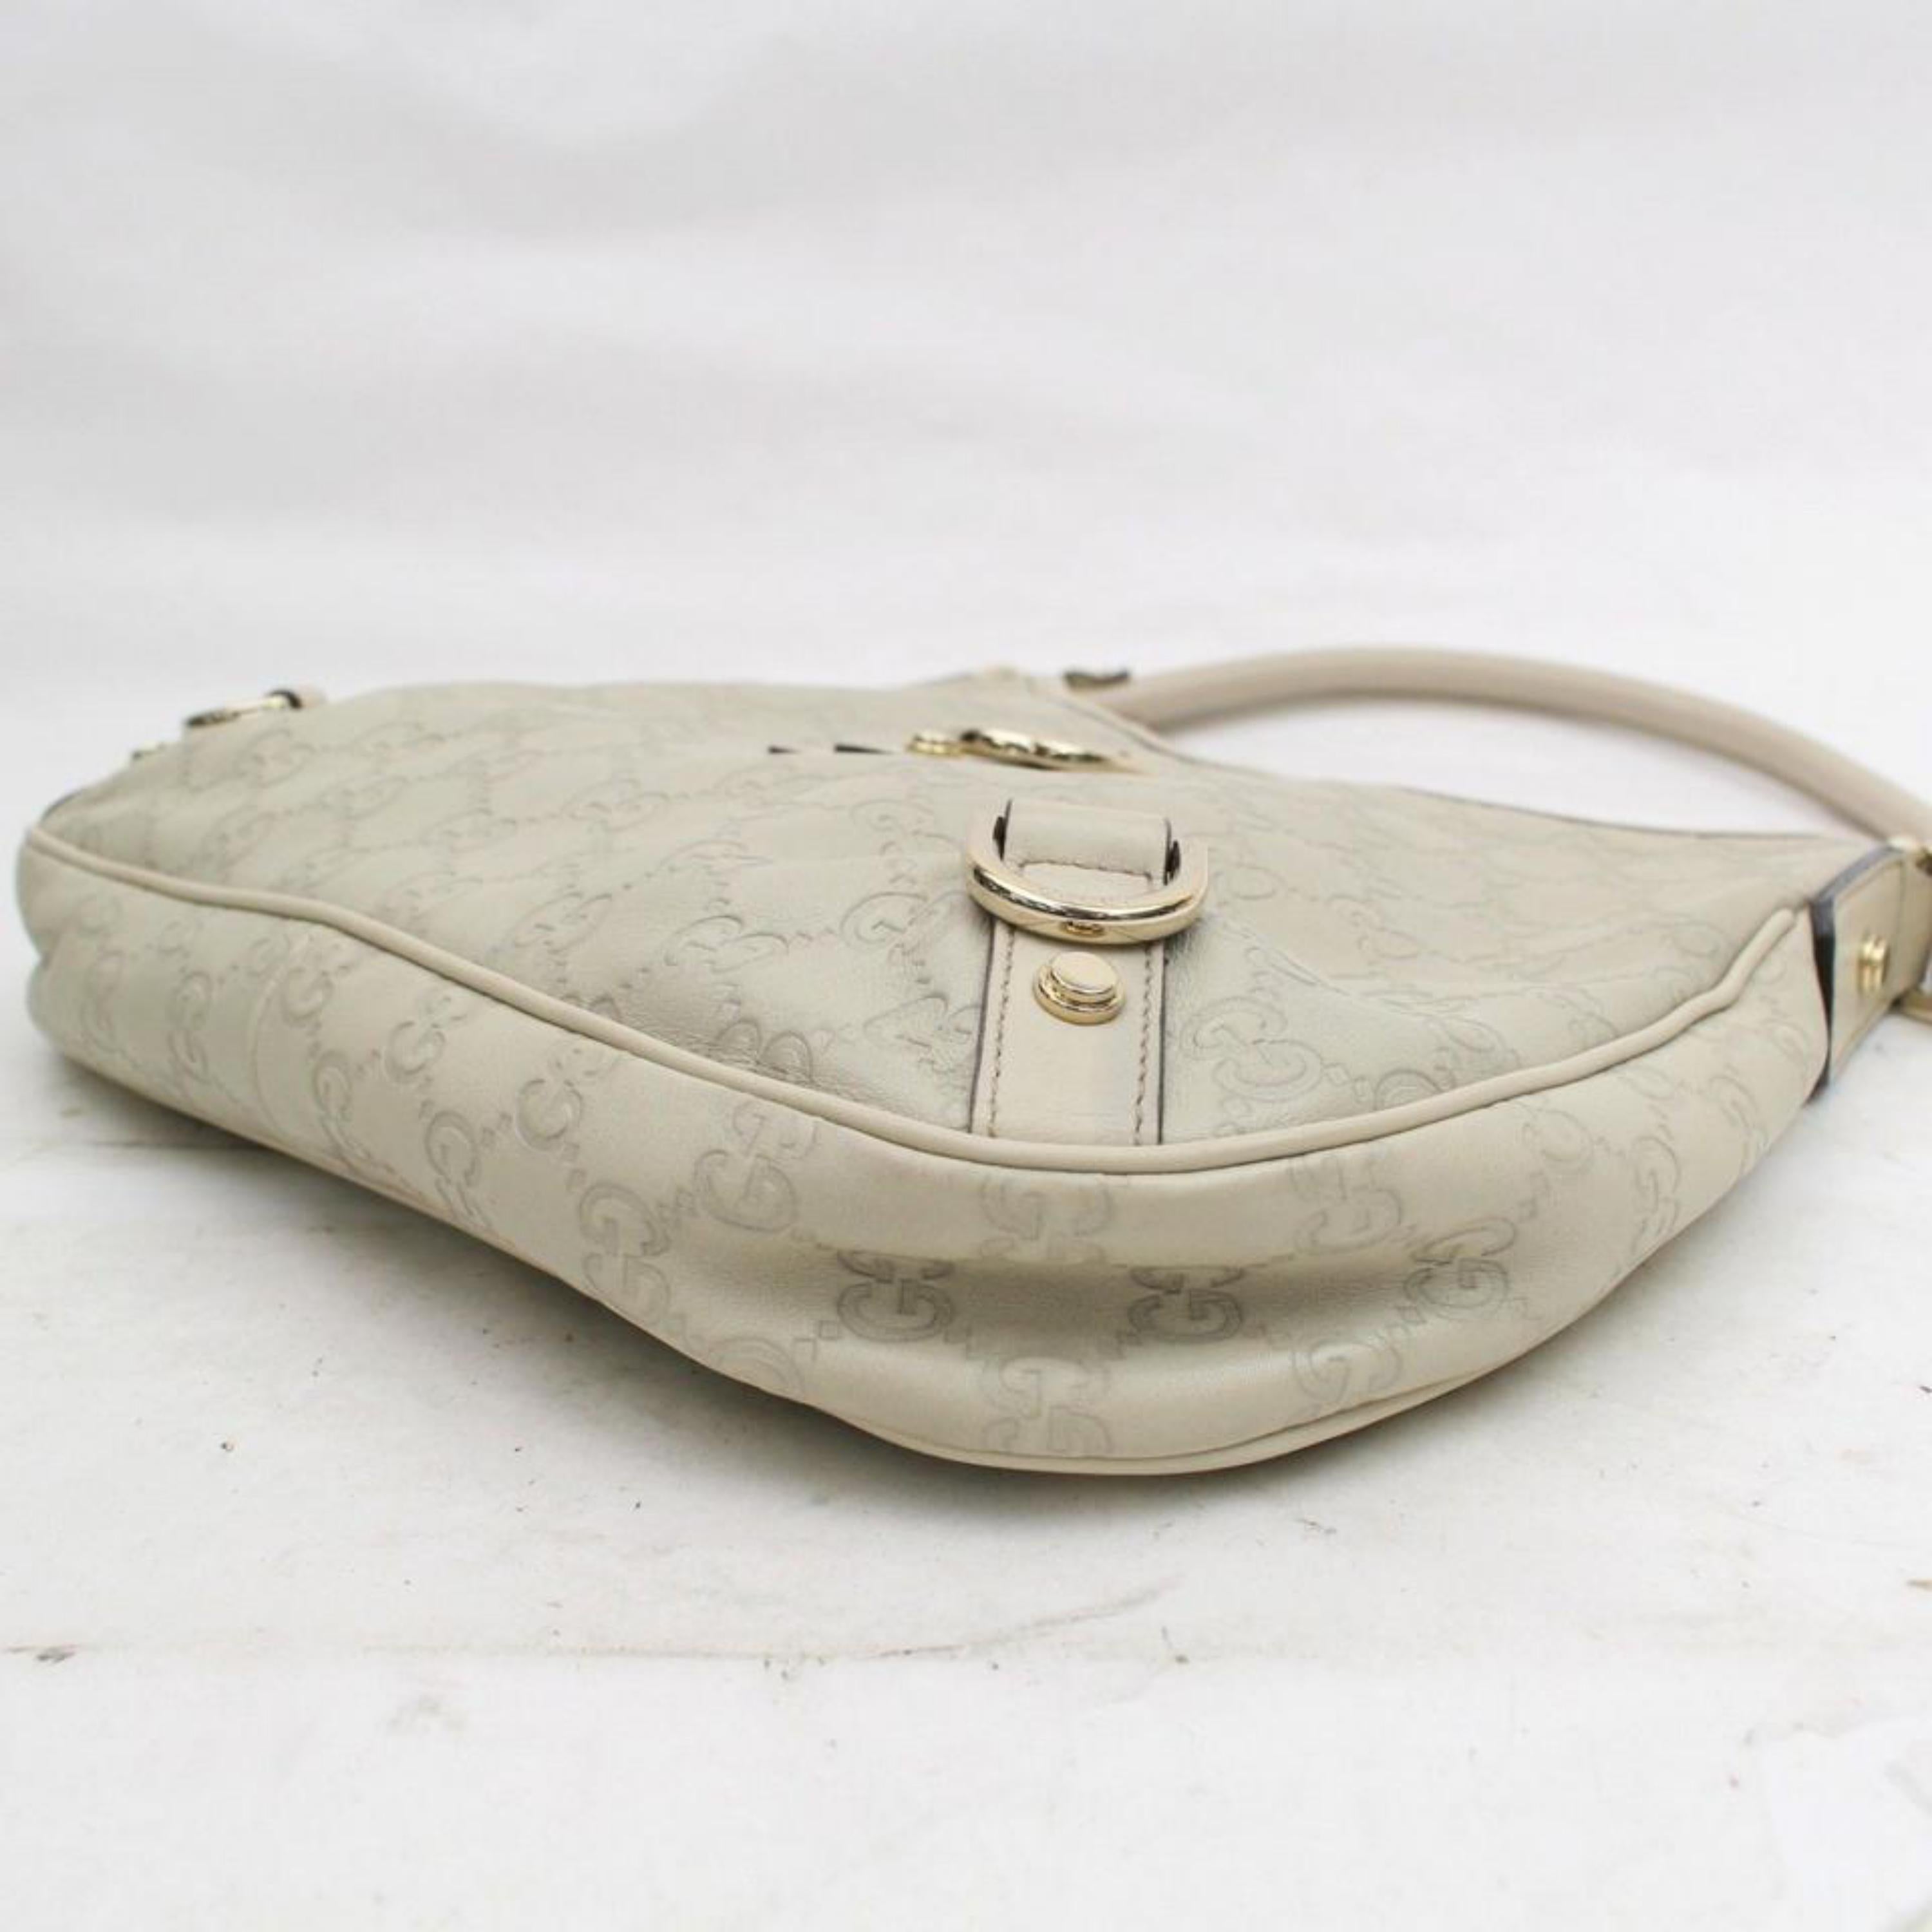 Gucci Ivory Guccissima D Ring Hobo 868308 Cream Leather Shoulder Bag For Sale 4